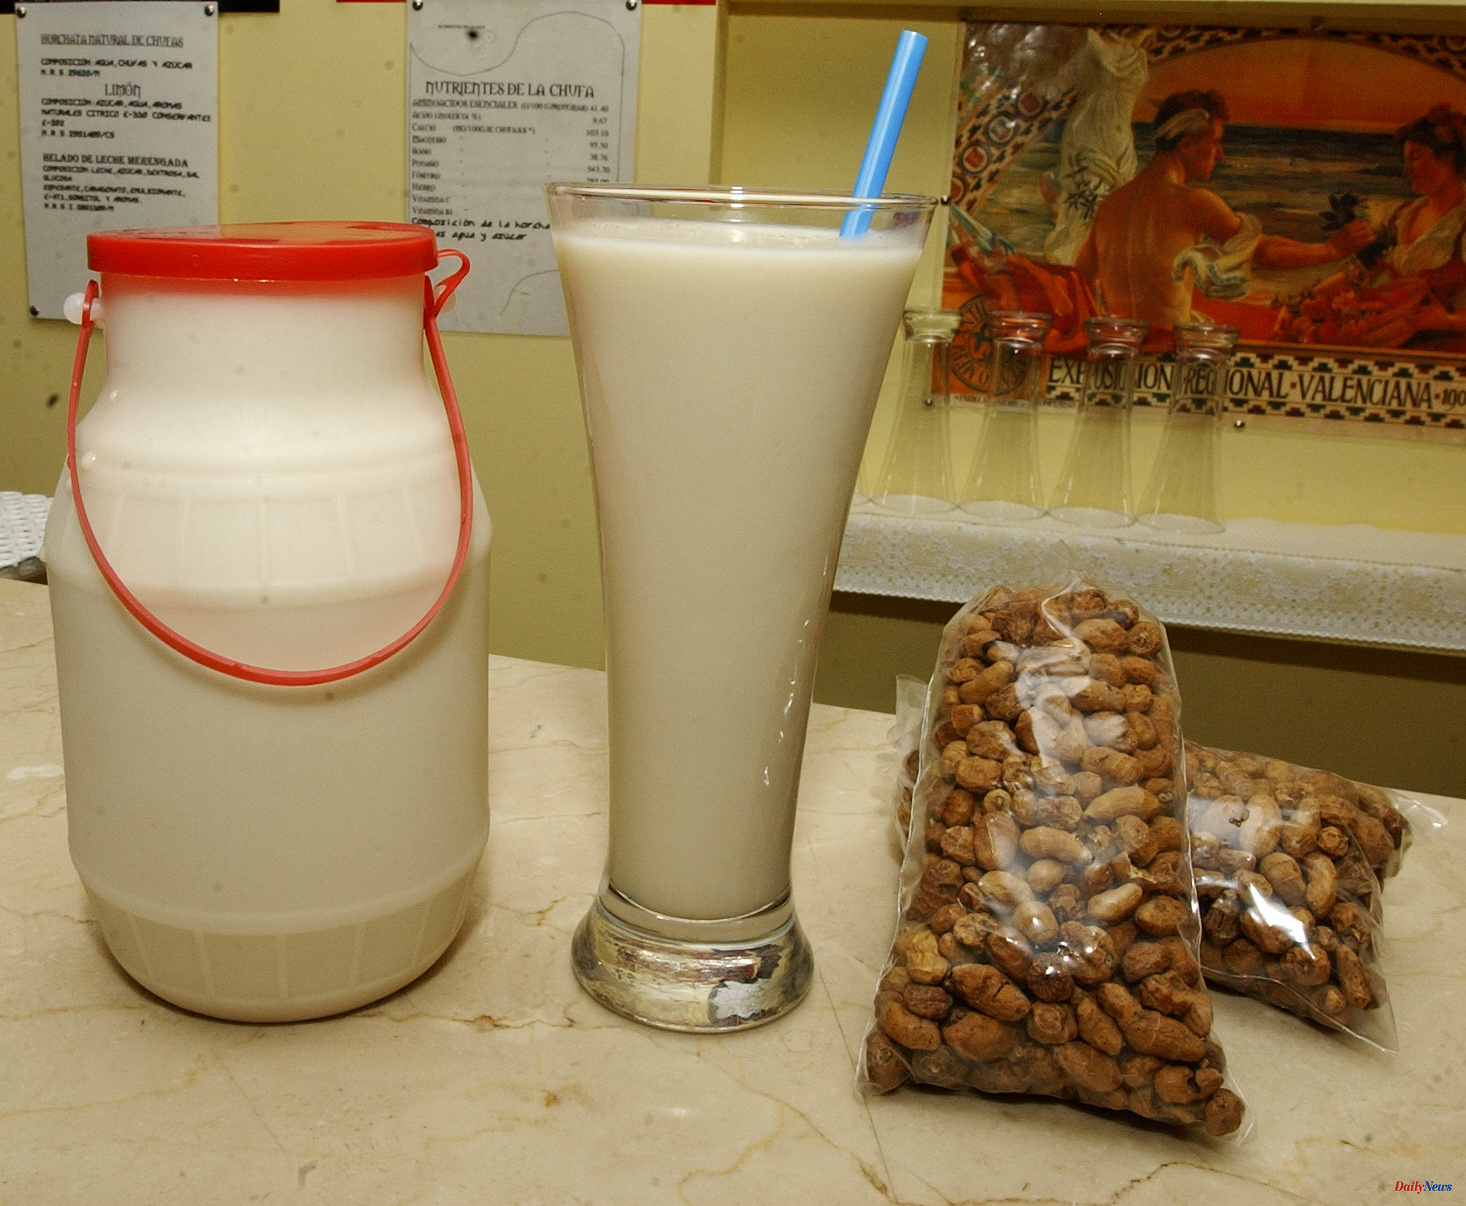 What does the expression "have horchata in your veins" mean and where does it come from?